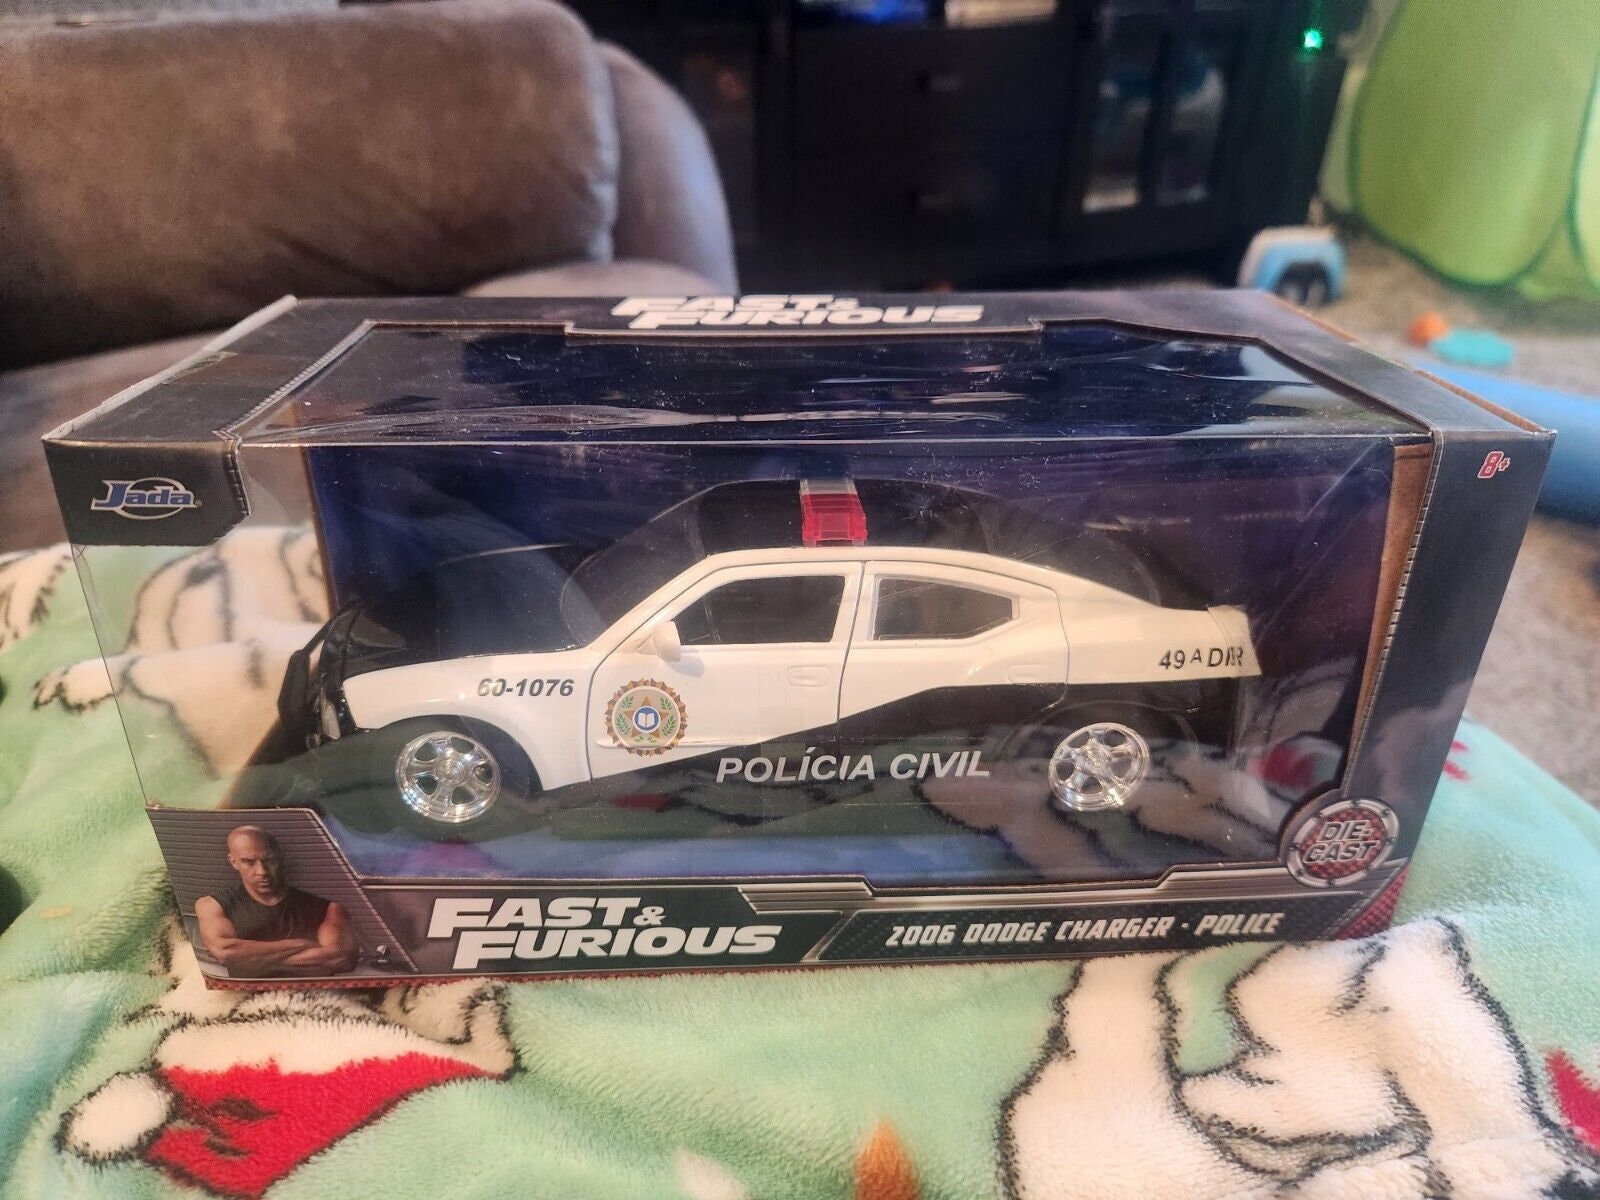 2006 Dodge Charger Police FAST & FURIOUS 1/24 - Etsy 日本